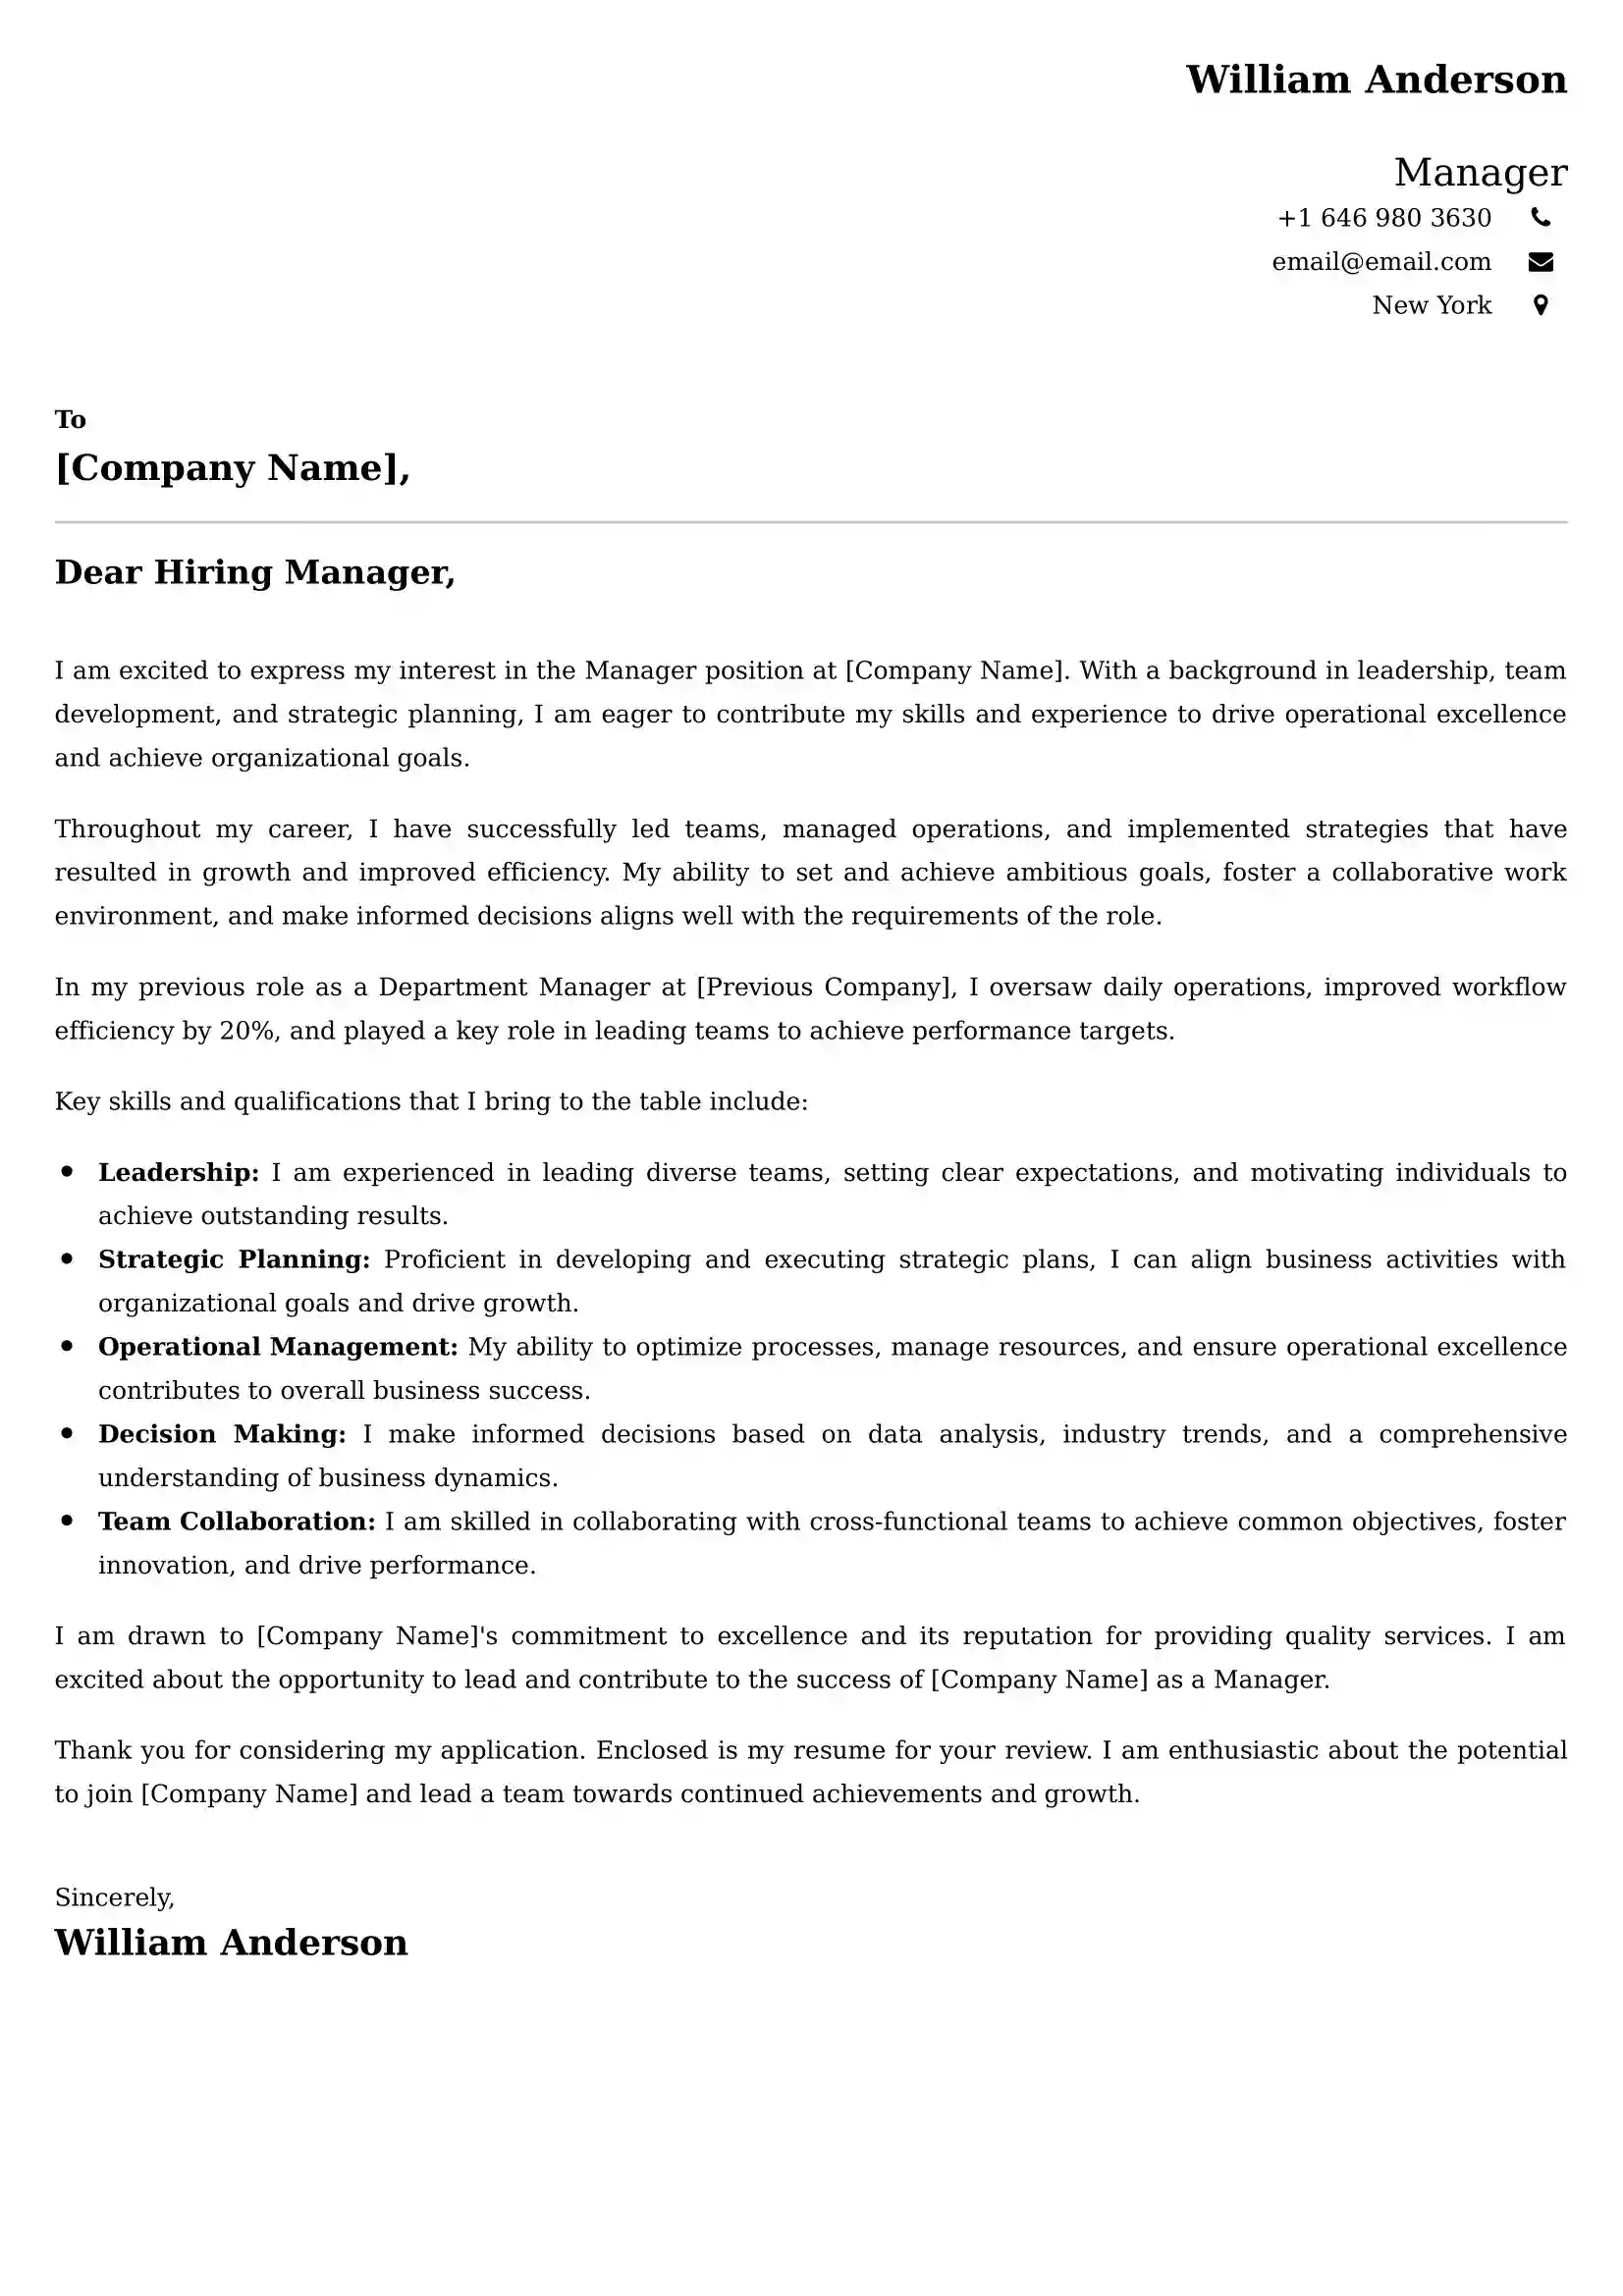 Manager Cover Letter Examples Australia